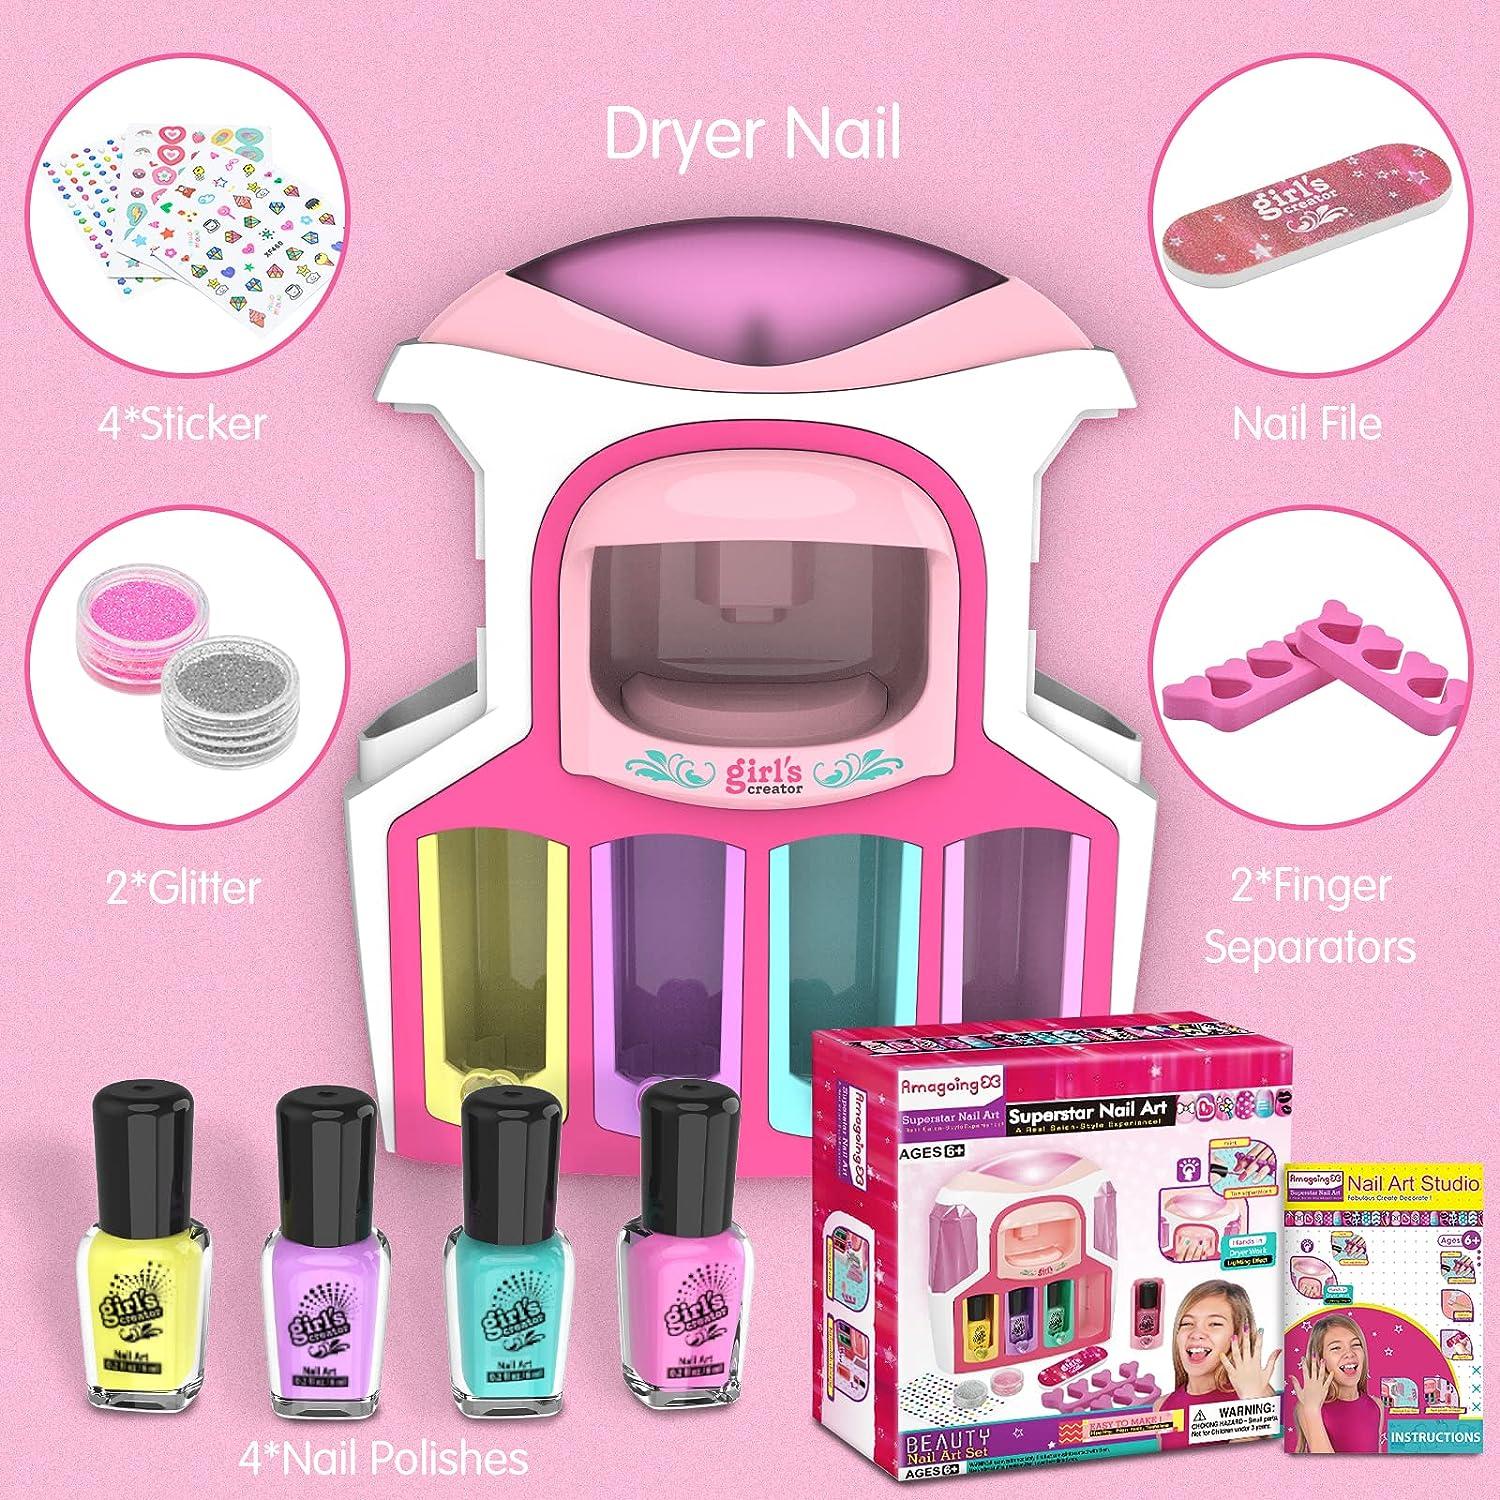 Nail Polish Kit For Girls 7-12 Years Old, Nail Art Toys For Girls Age 5 6 7  8 9 10 11 12, Nail Art Studio With Pink Nail Dryer For Girls, Ideal